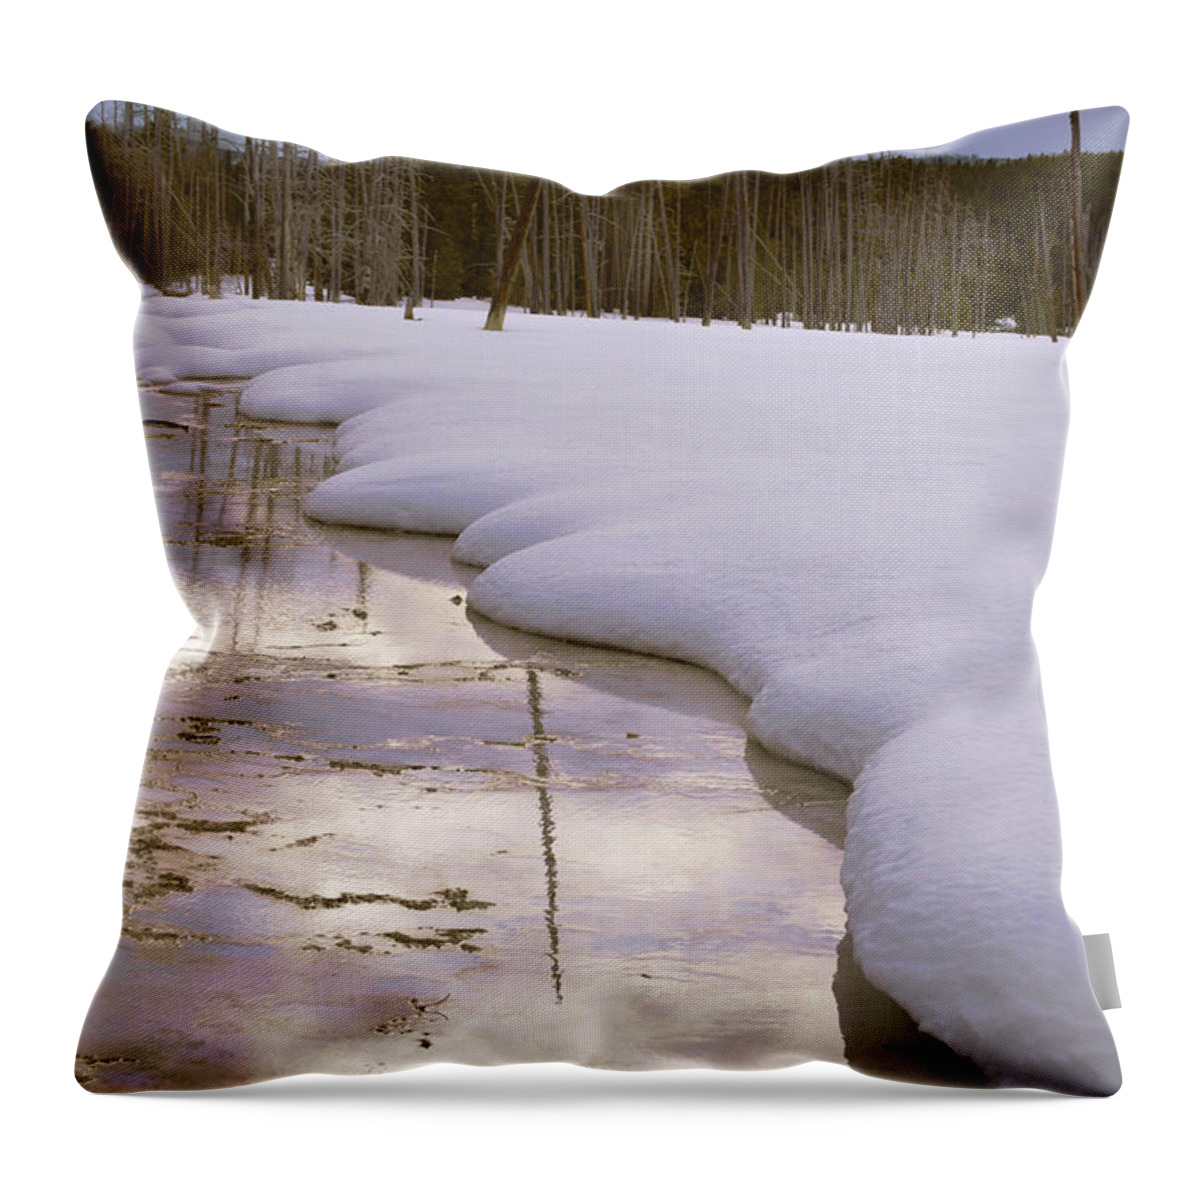 Winter Throw Pillow featuring the photograph Cold Reflections by Kae Cheatham